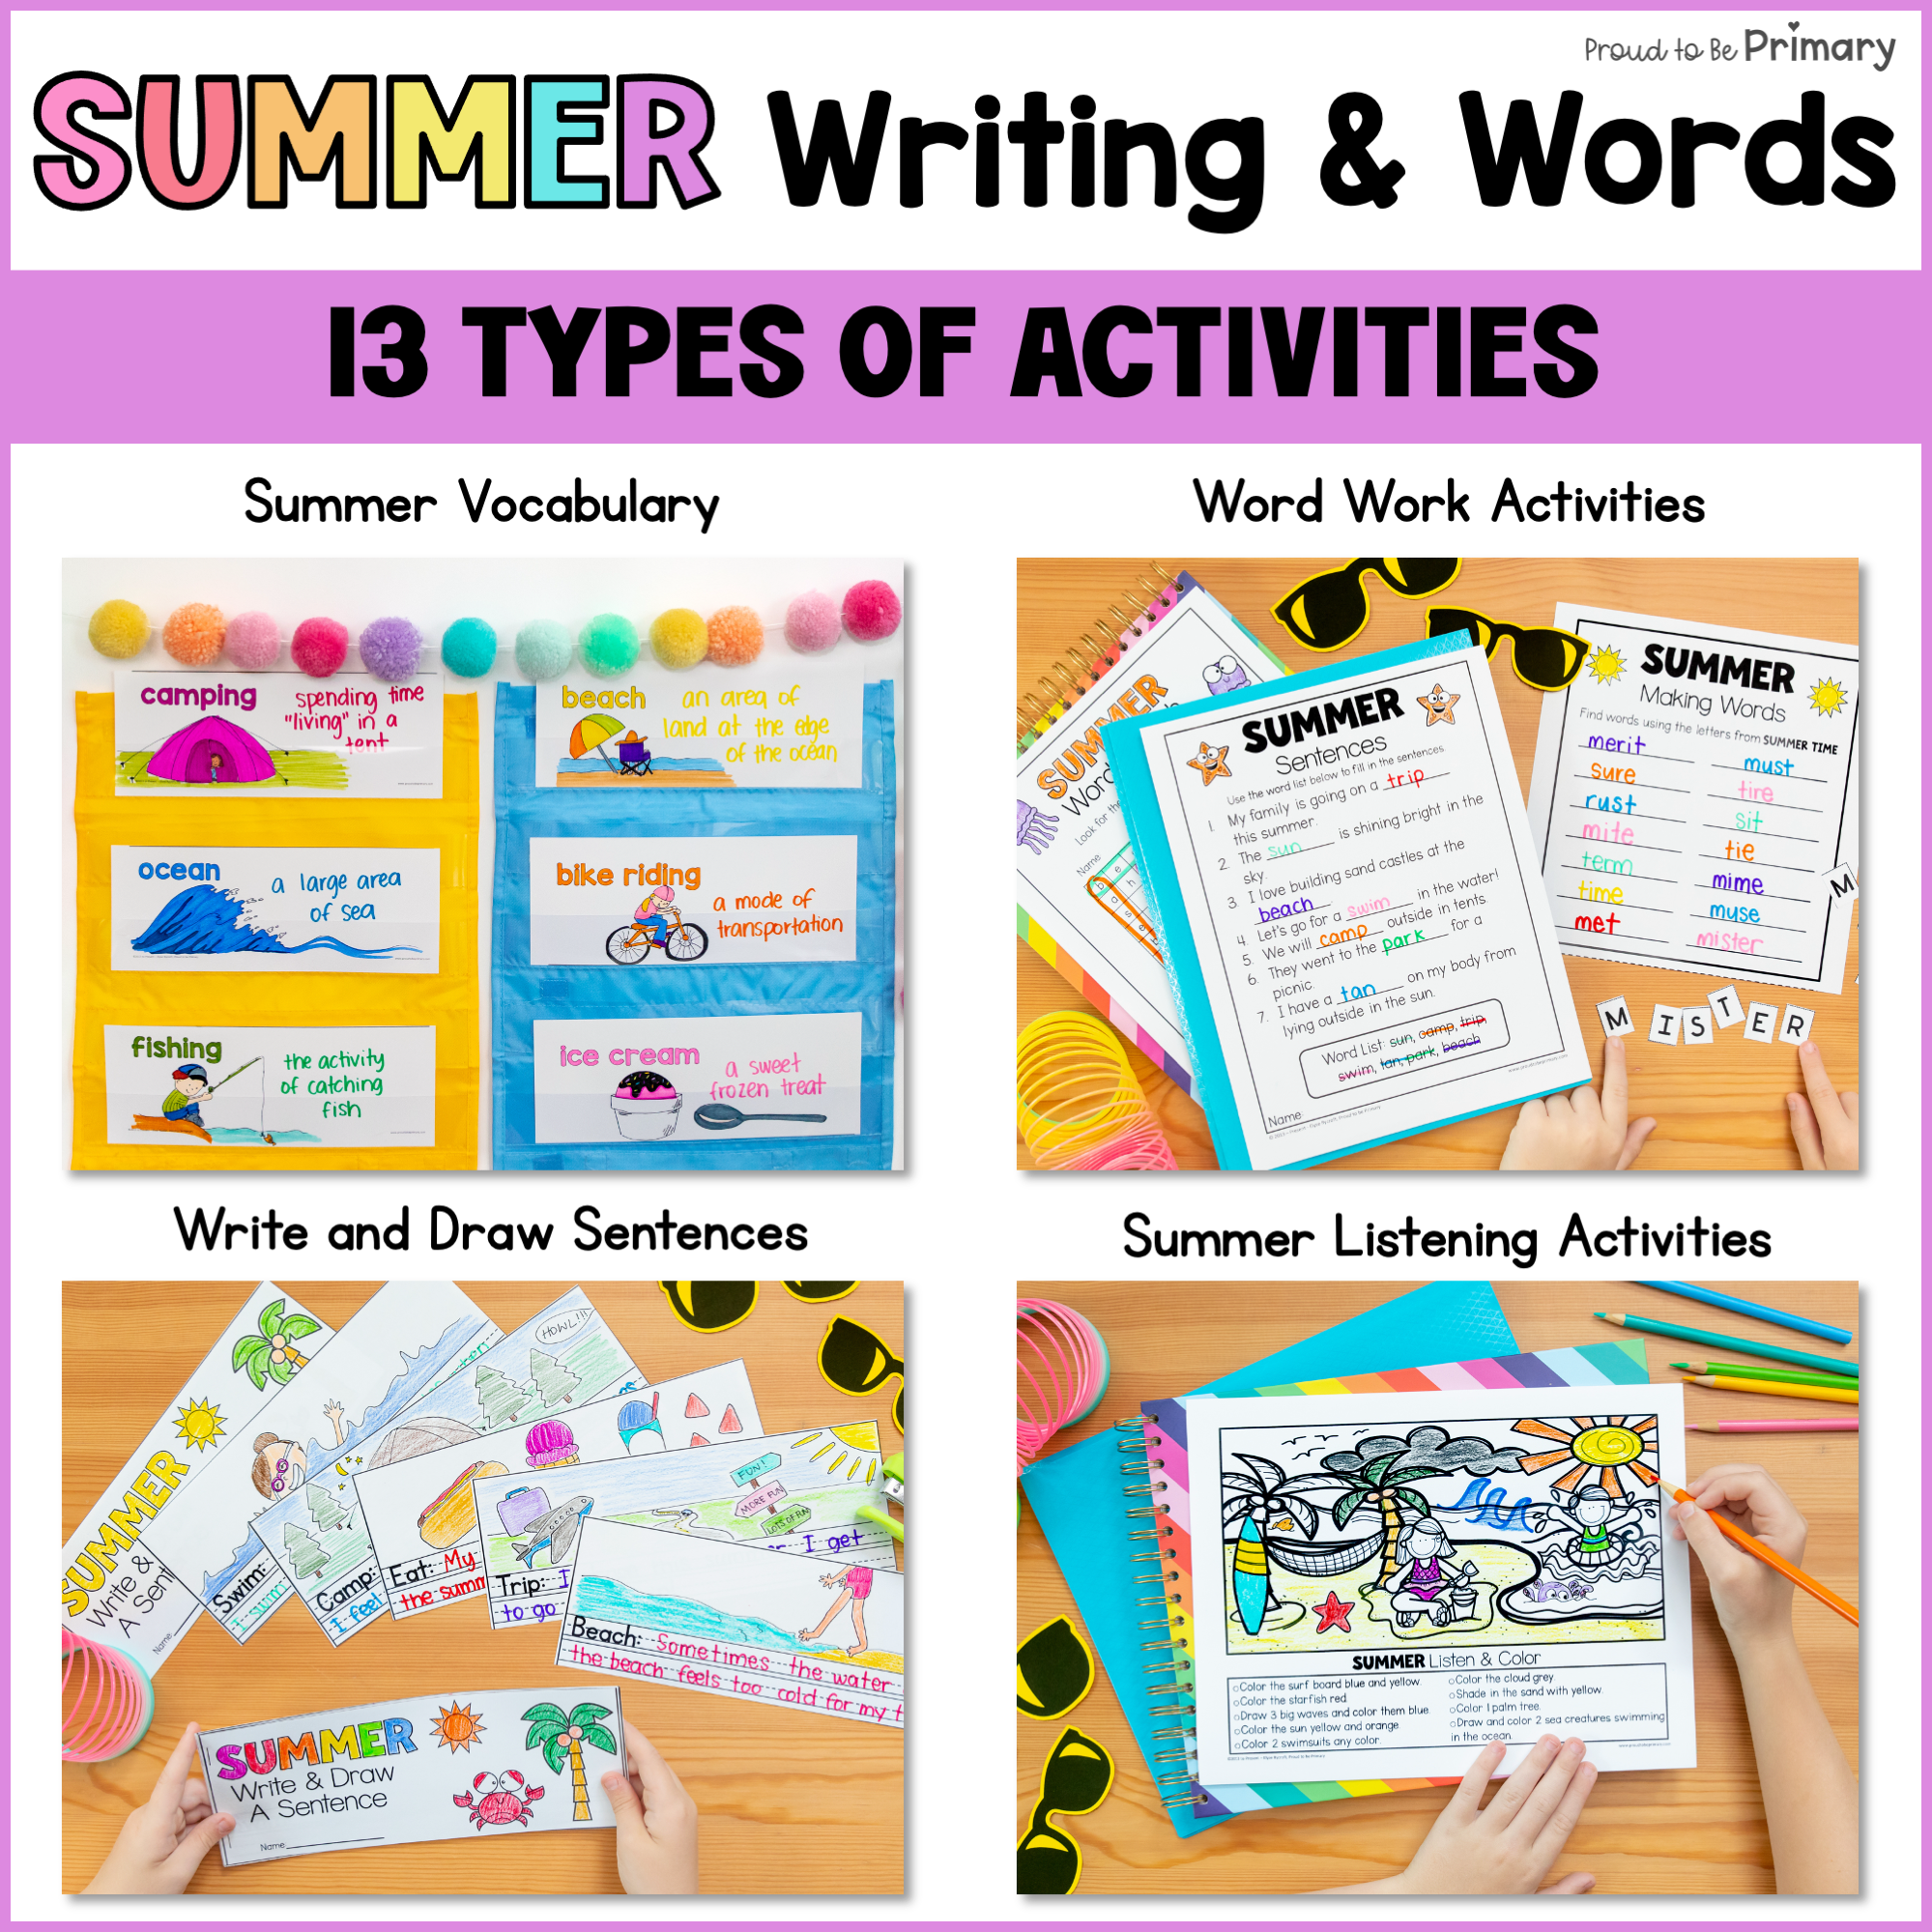 Summer Writing Activities & Word Work - End of the Year Prompts, Poetry, How-To